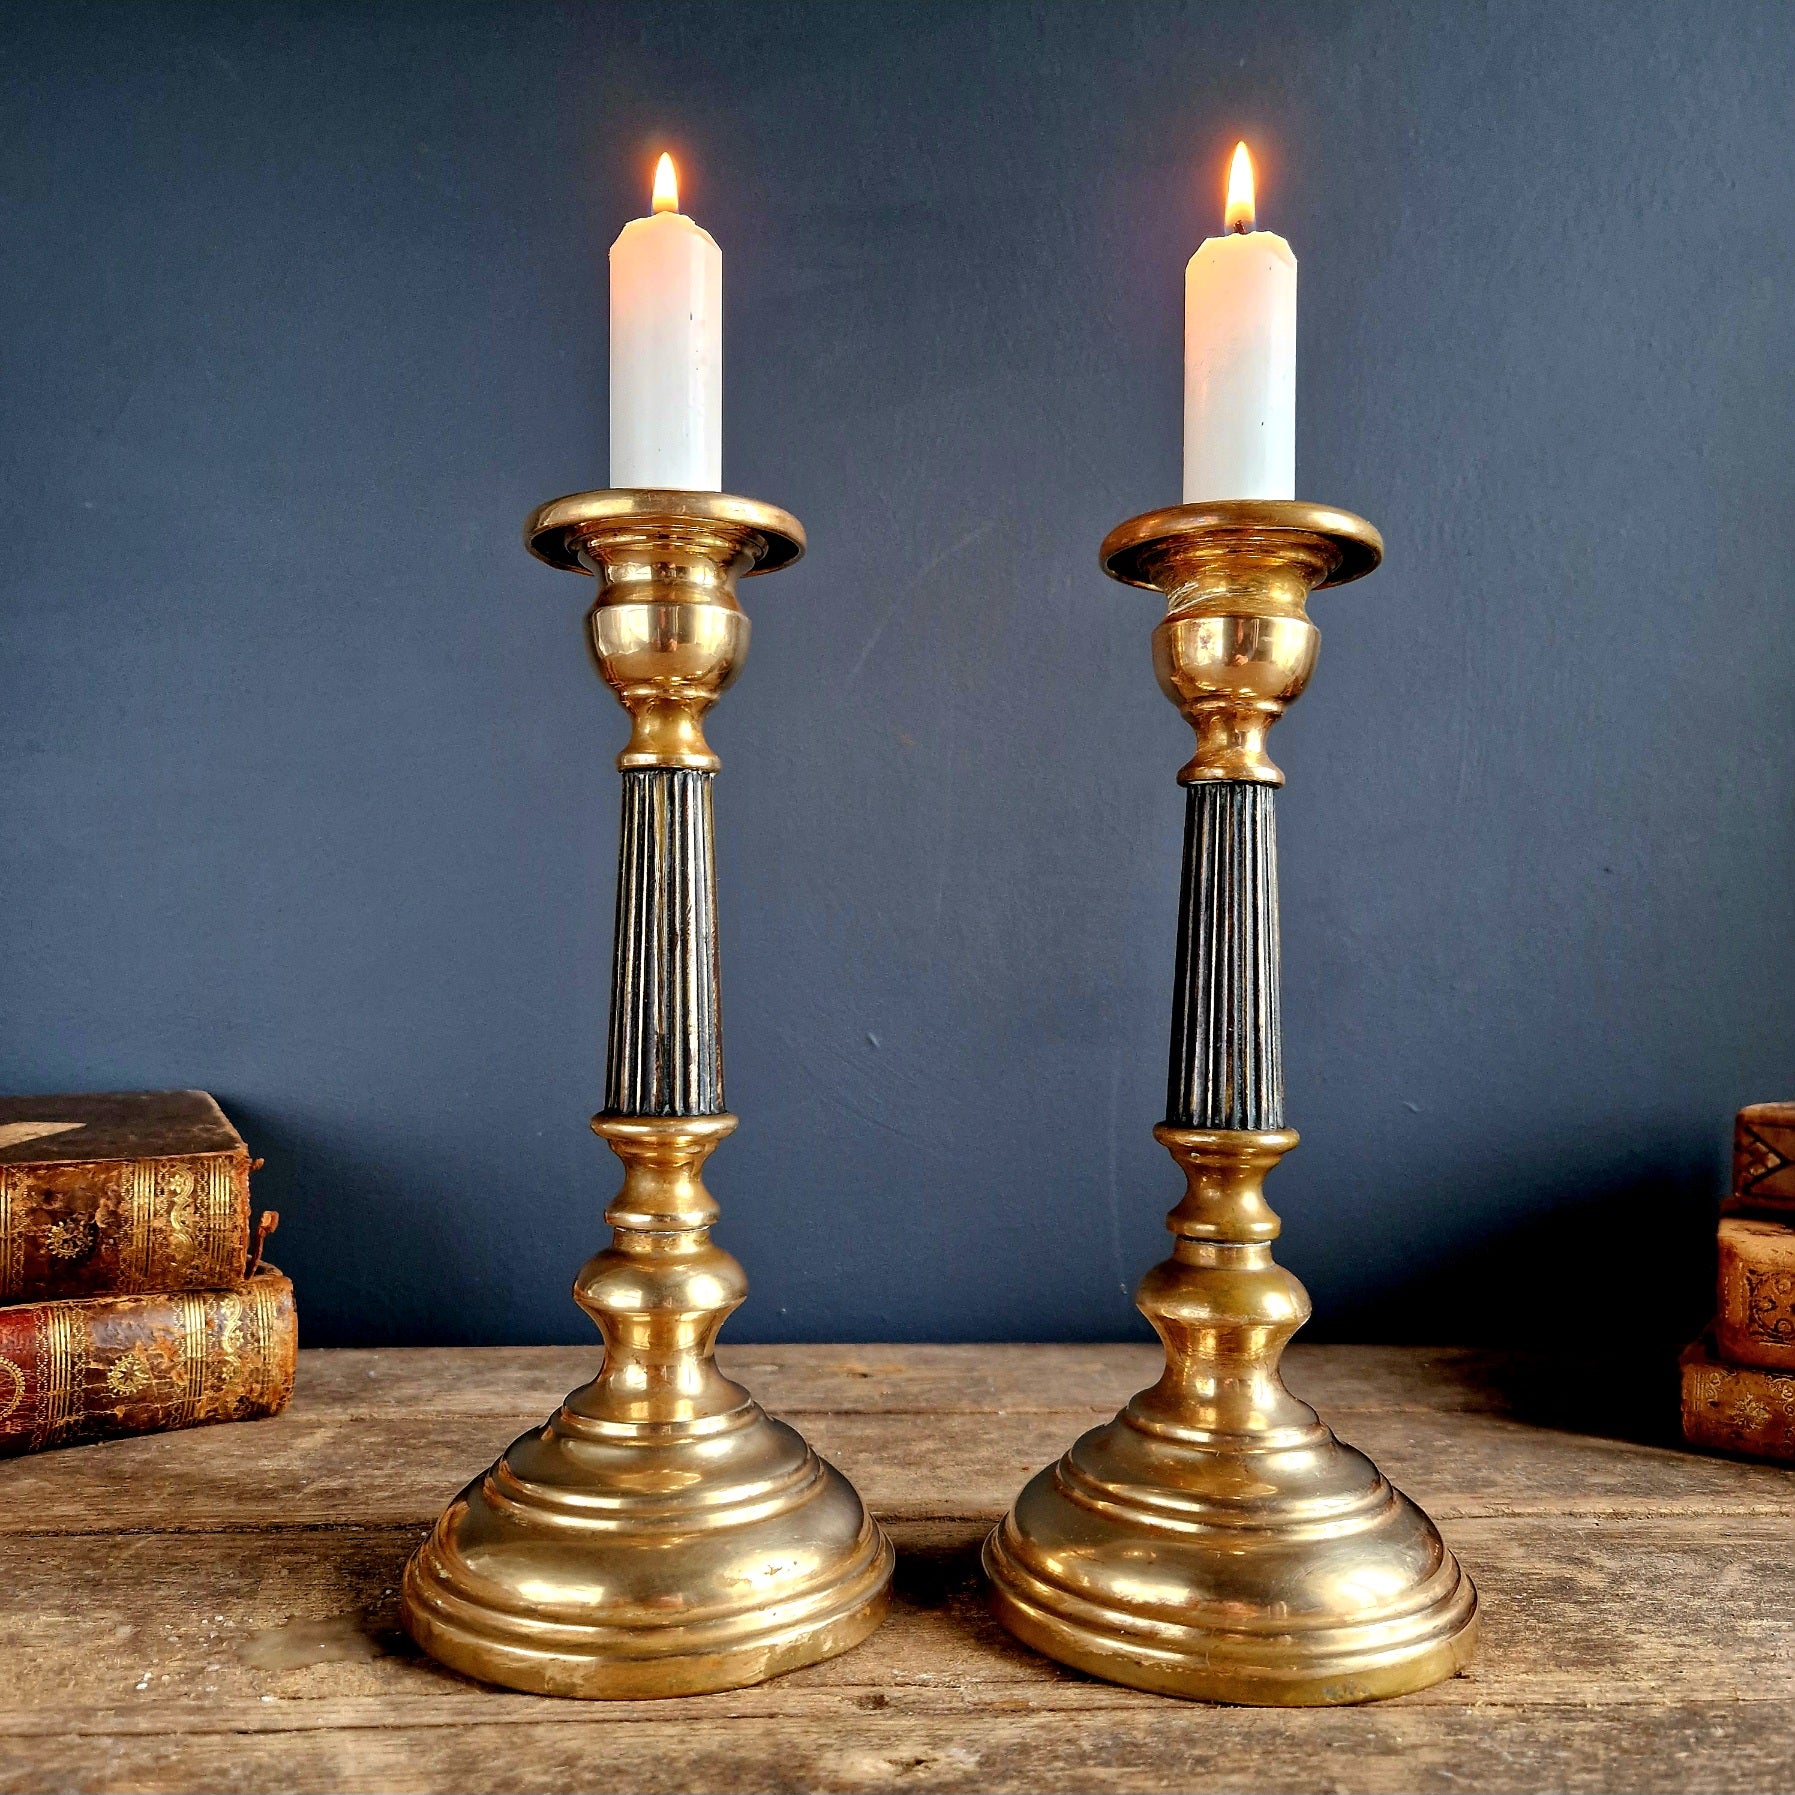 Pair of French brass antique candle holders